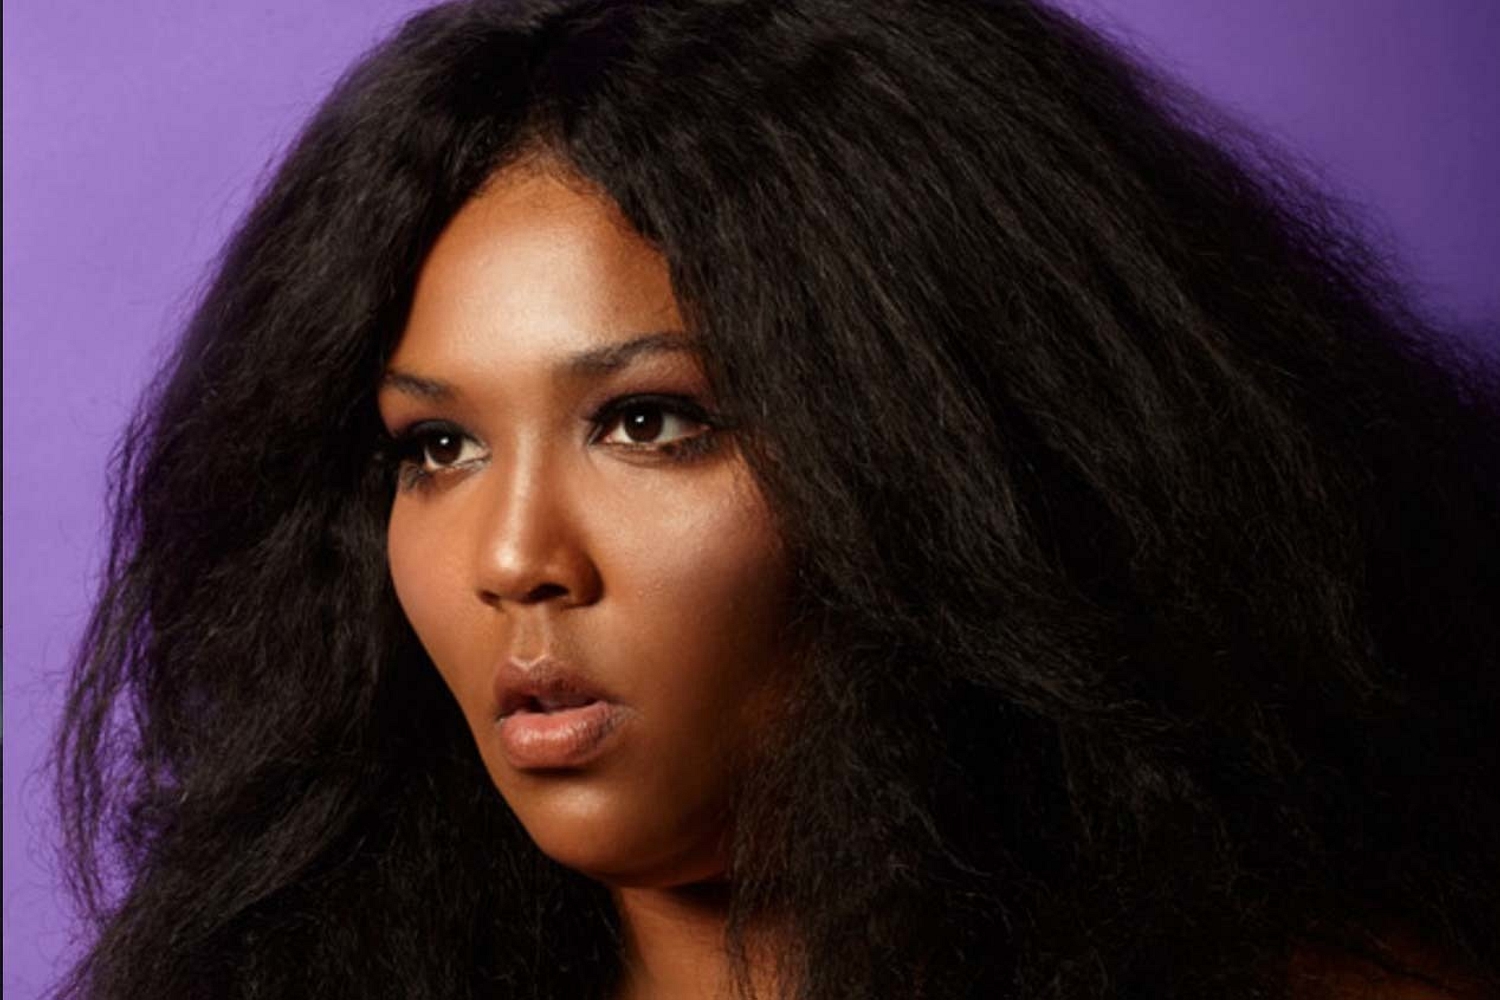 Lizzo: “I’m not this crazy, axe-wielding girl any more”